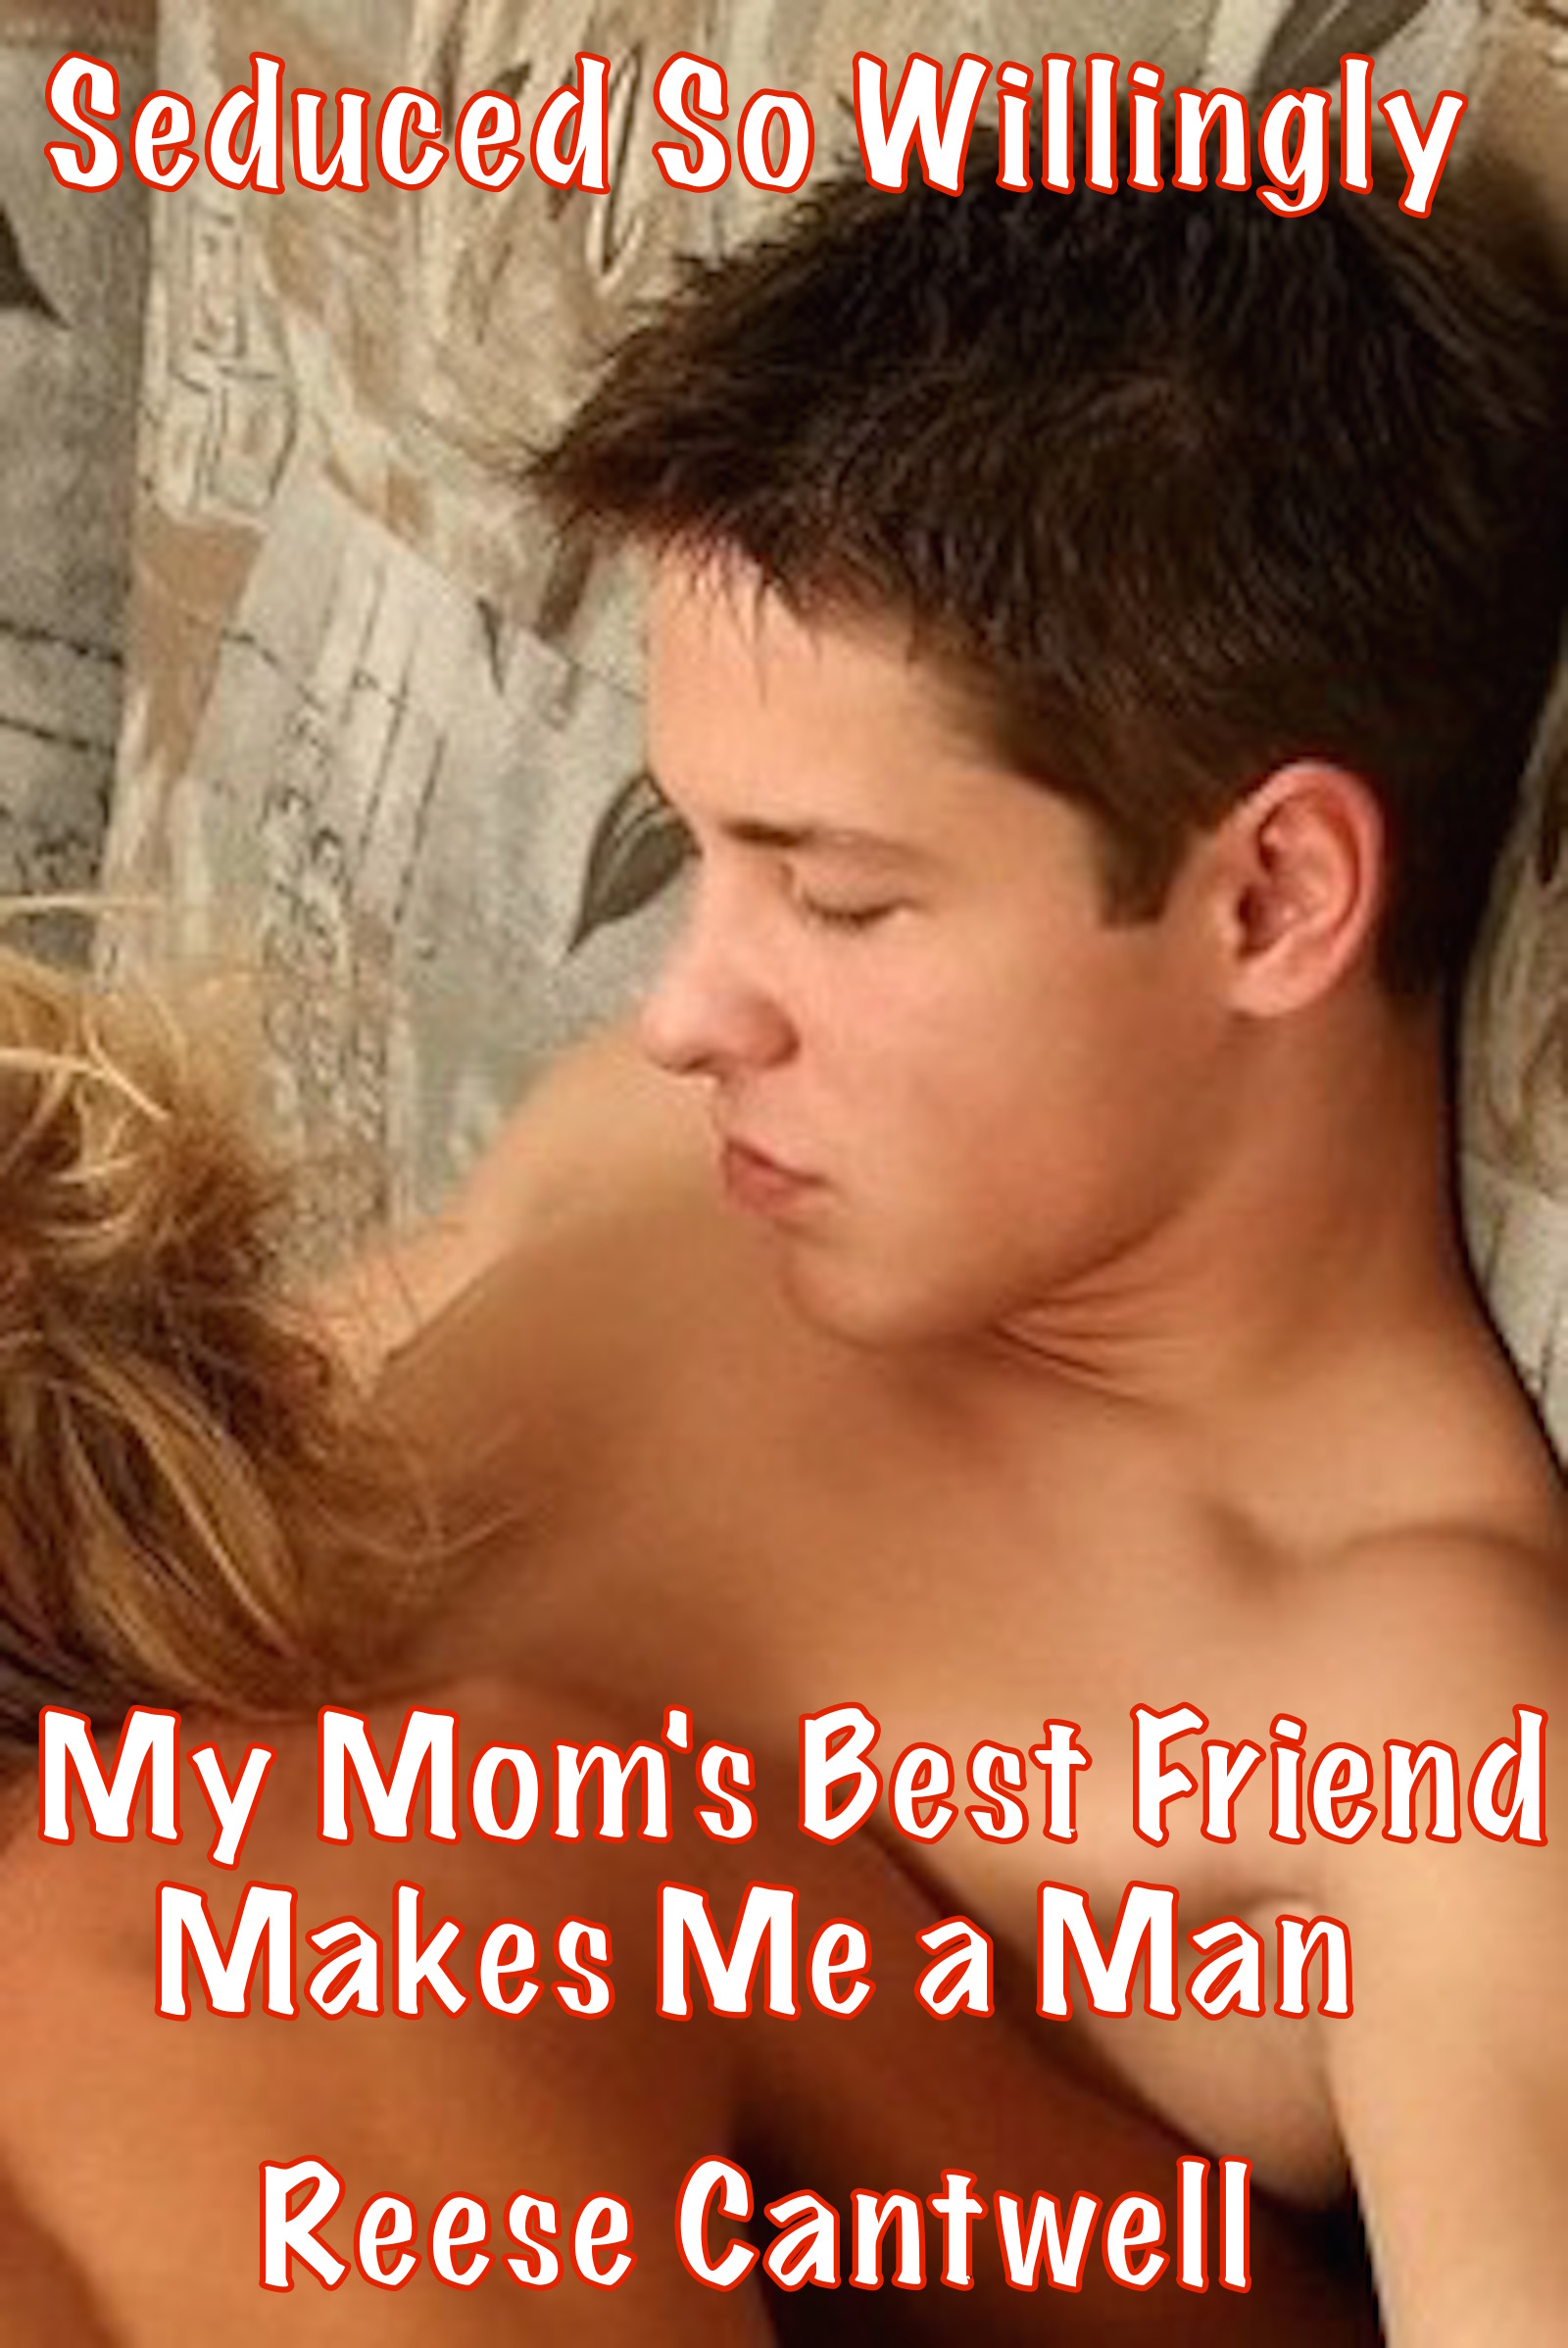 david hynds recommends seduced by best friends mom pic